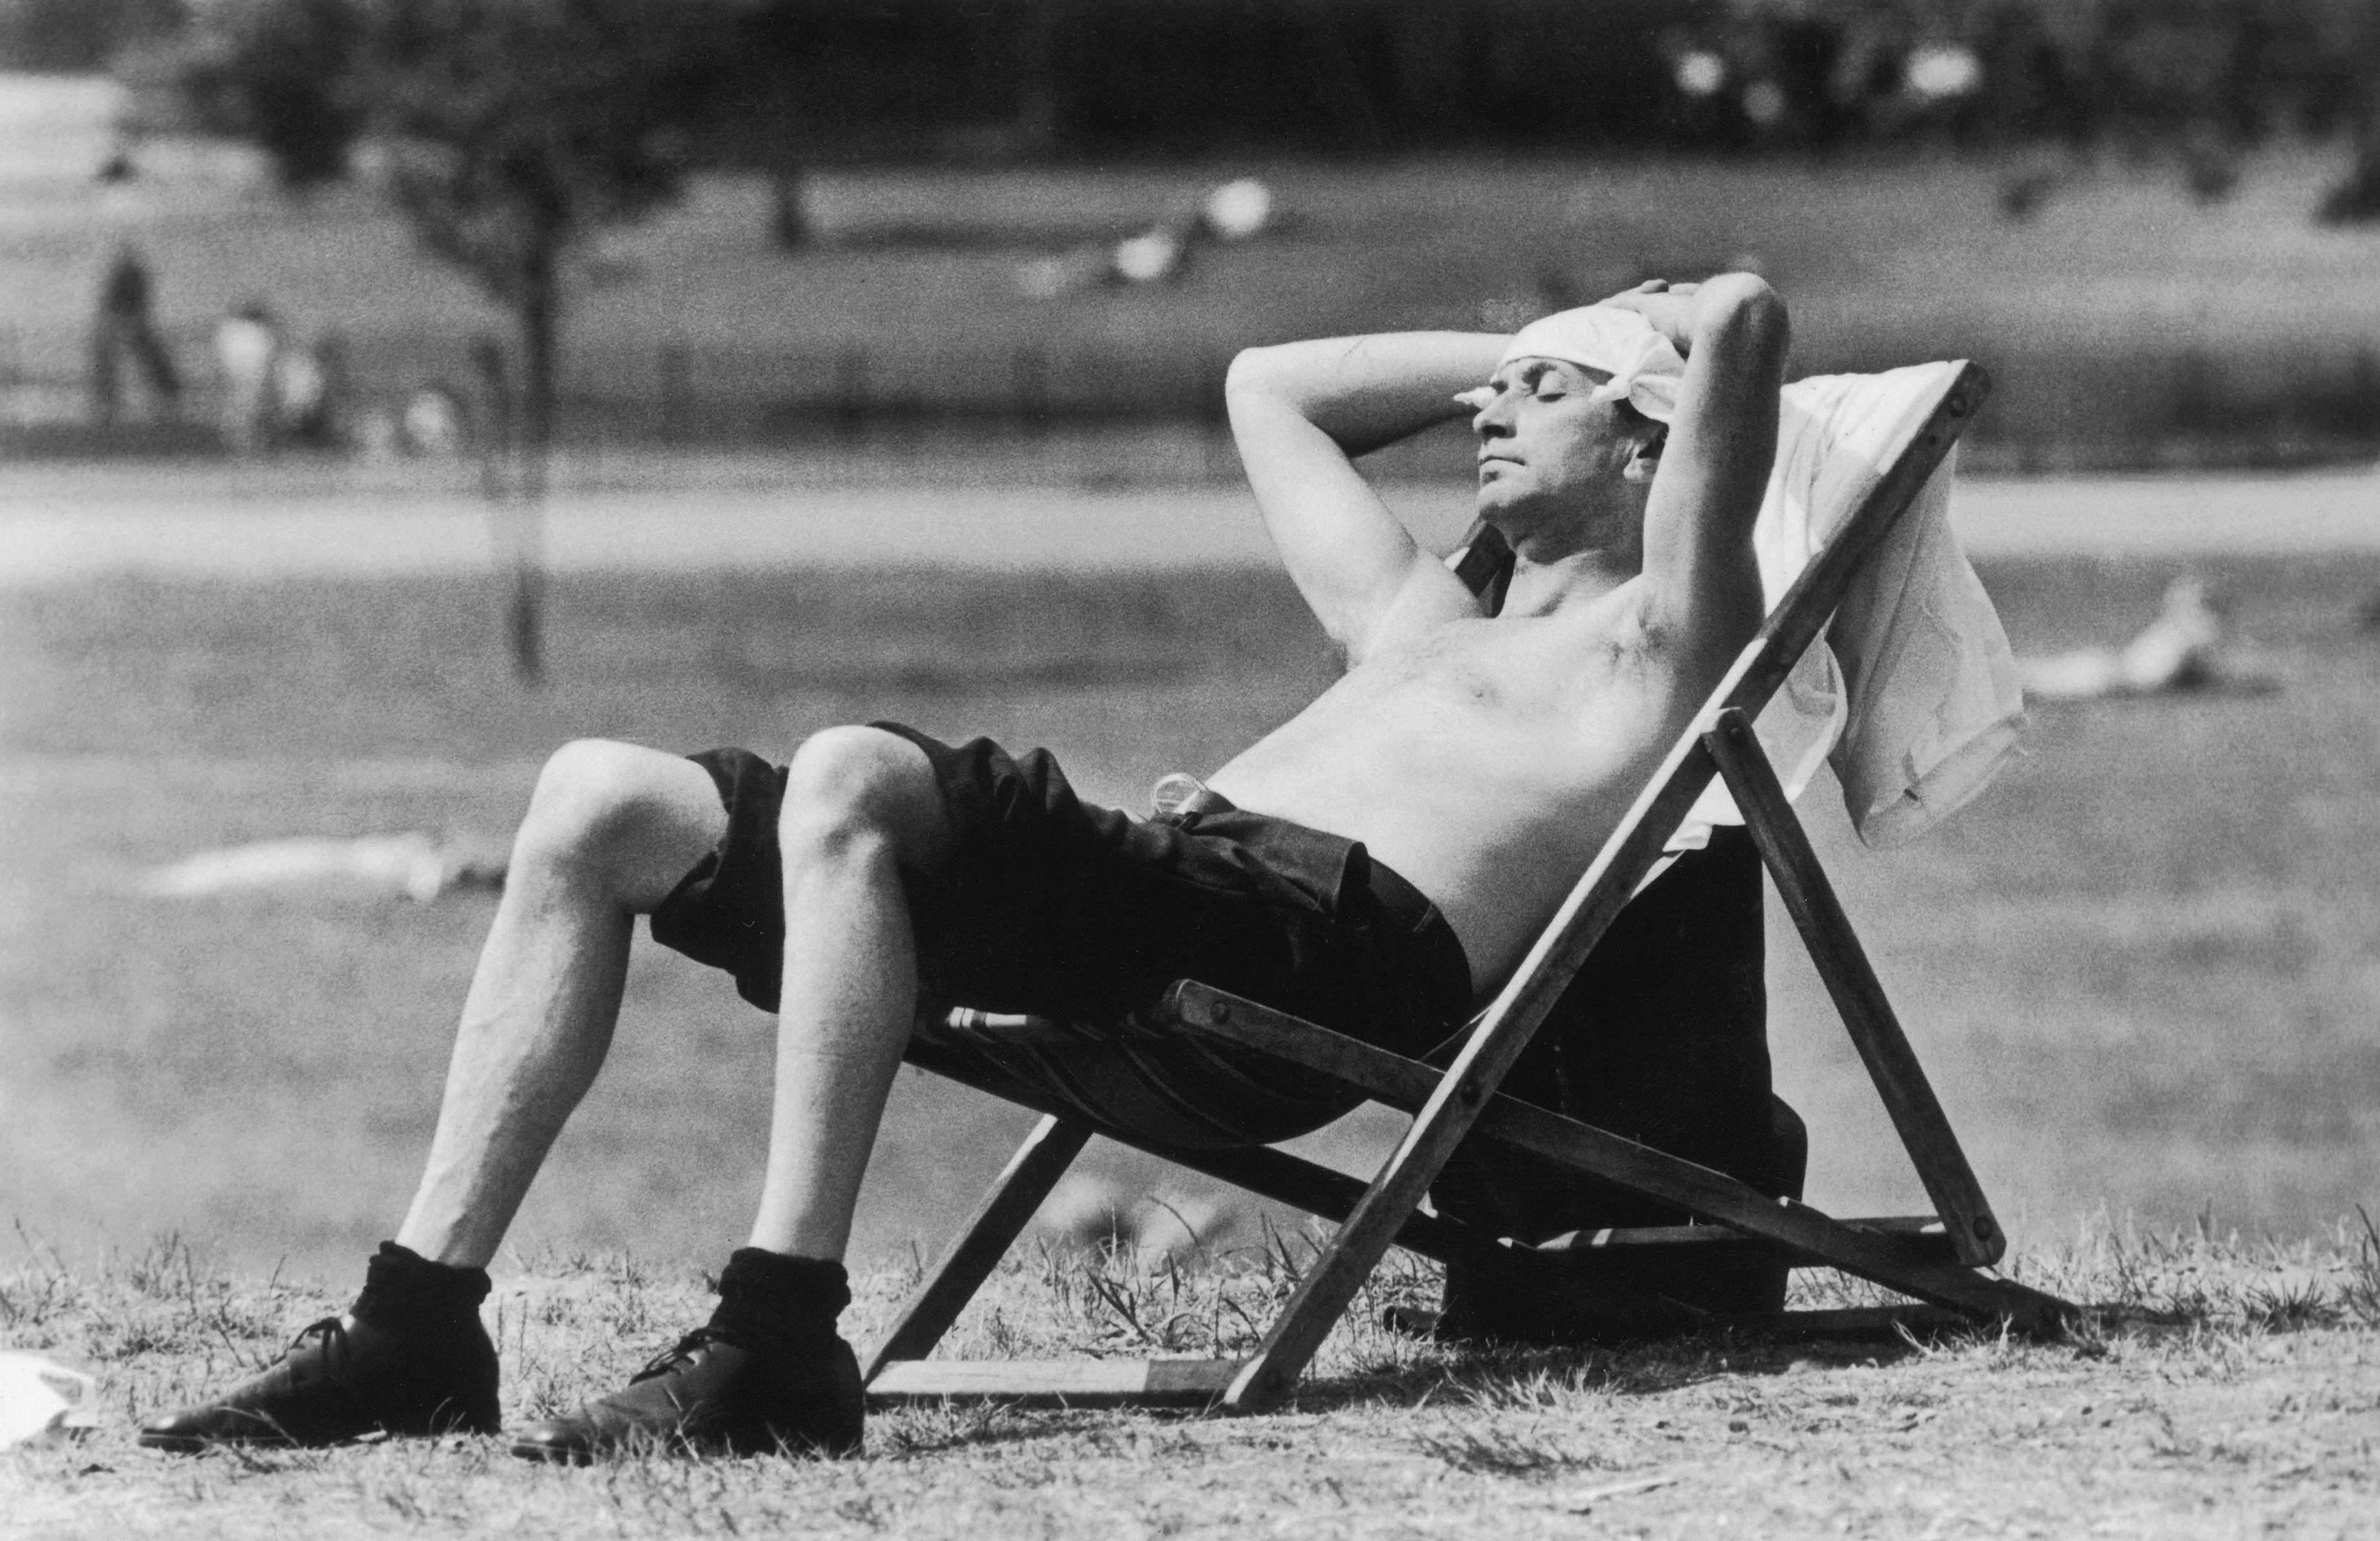 3rd June 1976:  A Londoner sunbathing in Kensington Gardens with a knotted handkerchief protecting his head from the sunshine  (Graham Wood/Evening Standard/Getty Images)